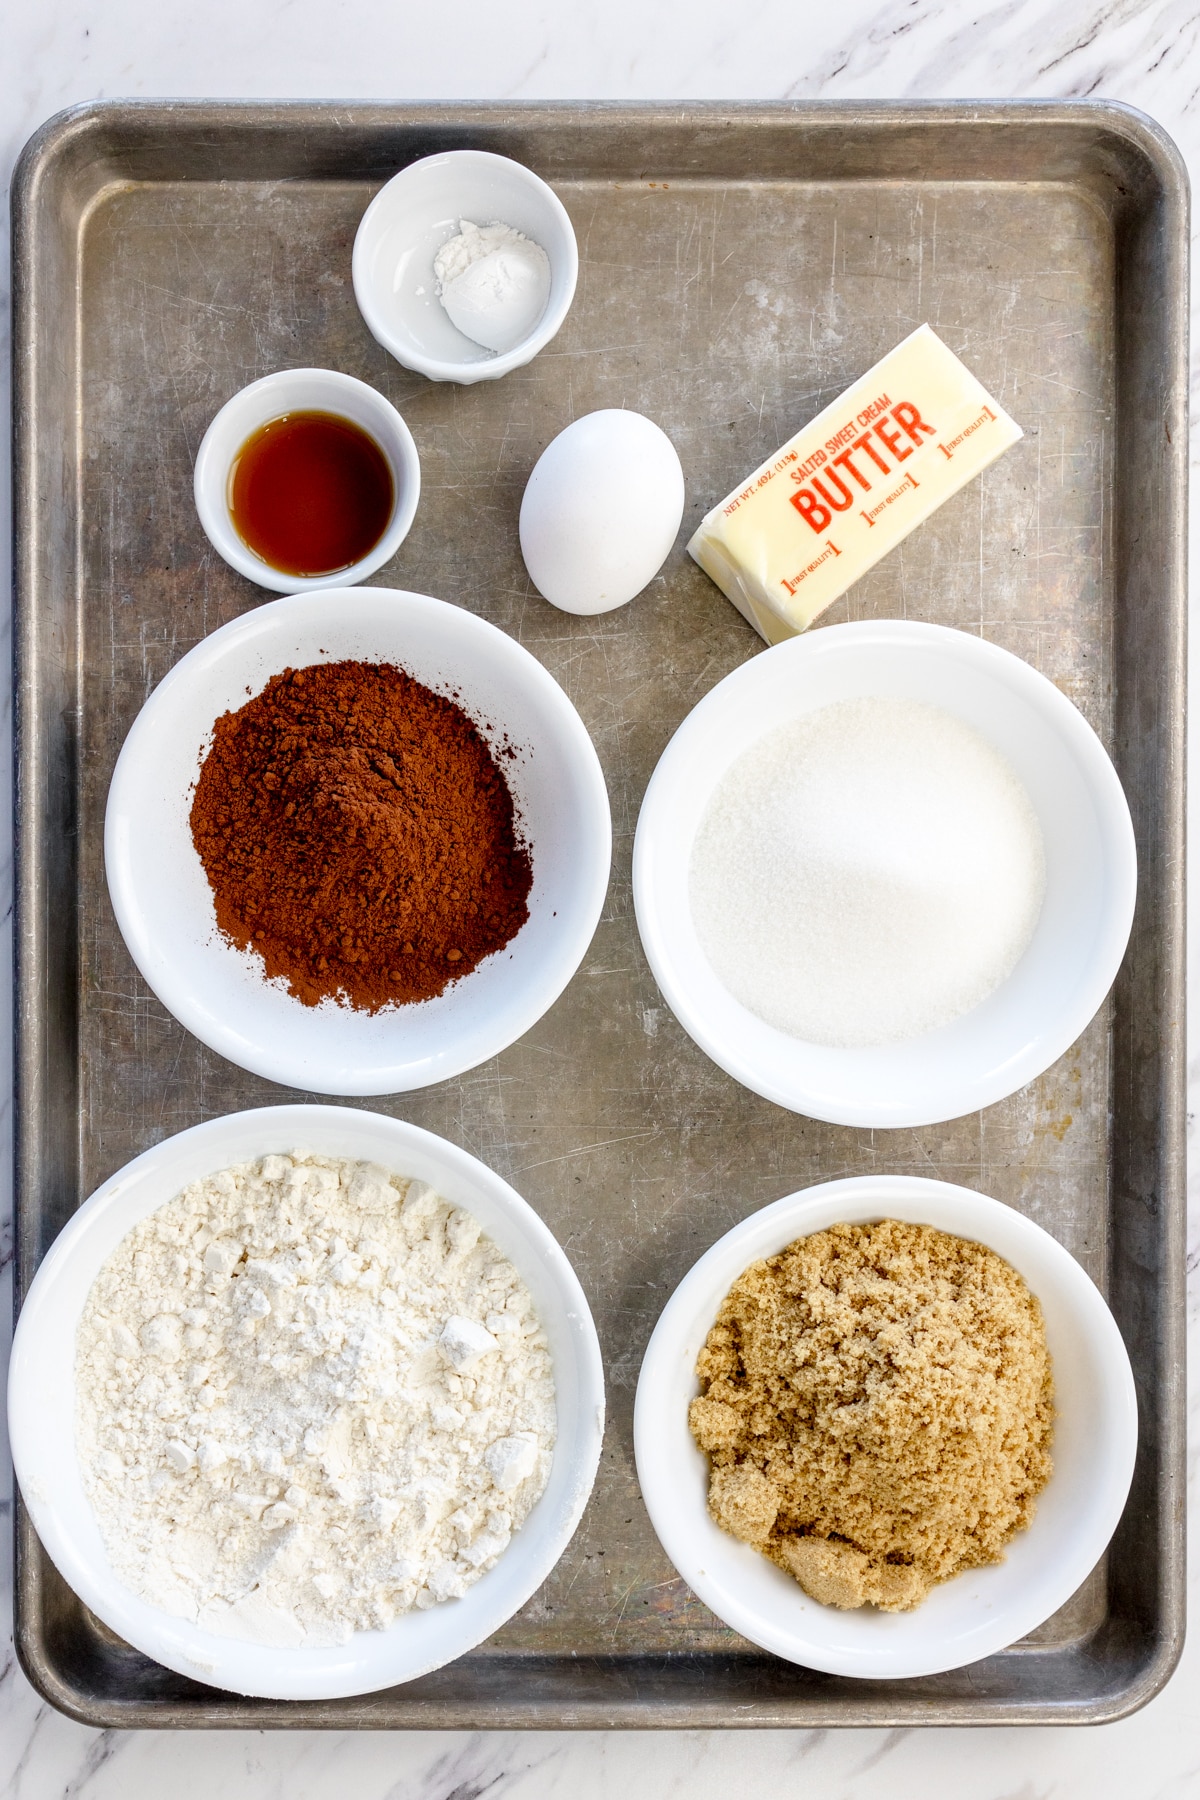 Top view of ingredients needed to make Chocolate Snickerdoodle Cookies.